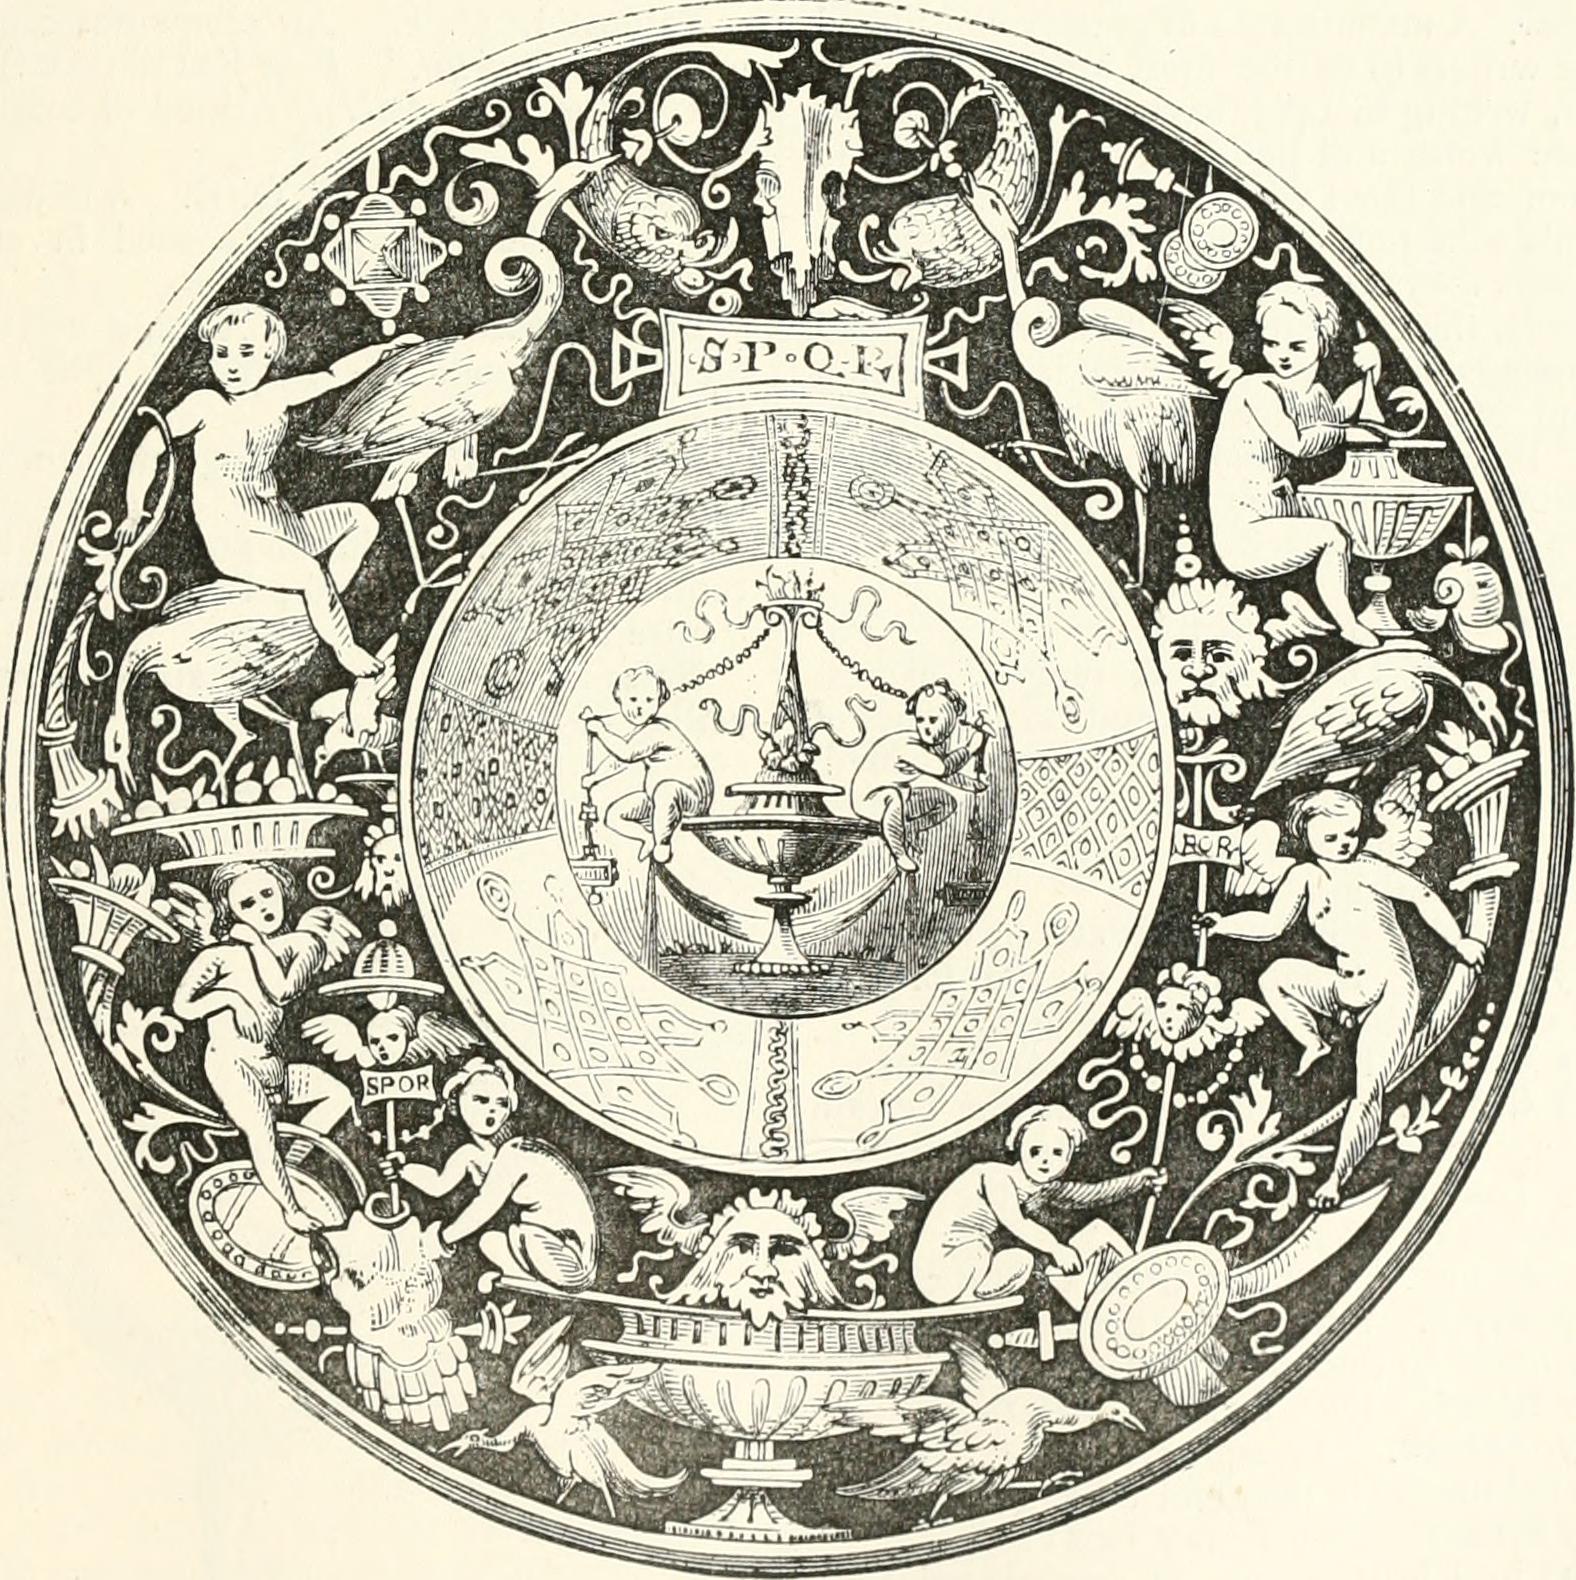 Image from page 144 of "An illustrated dictionary of words used in art and archaeology. Explaining terms frequently used in works on architecture, arms, bronzes, Christian art, colour, costume, decoration, devices, emblems, heraldry, lace, personal orname